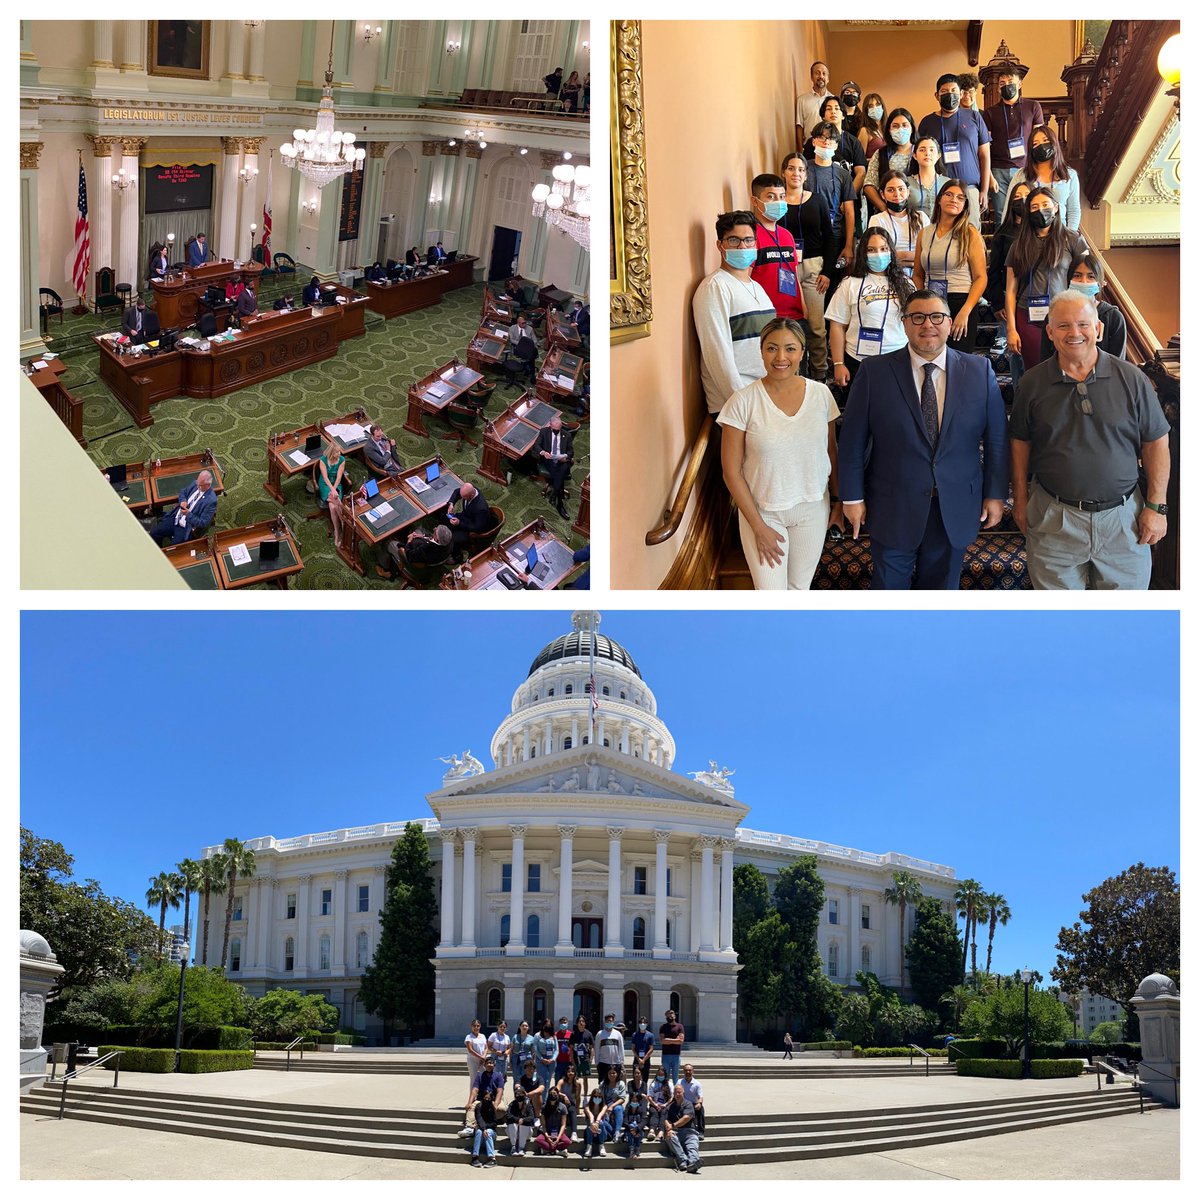 RCOE’s #MigrantEd of Coachella Valley visited our state’s capitol building in Sacramento 🐻. What a great opportunity to learn more about California history. They also visited @AsmEGarciaAD56 there! @WorldStrides